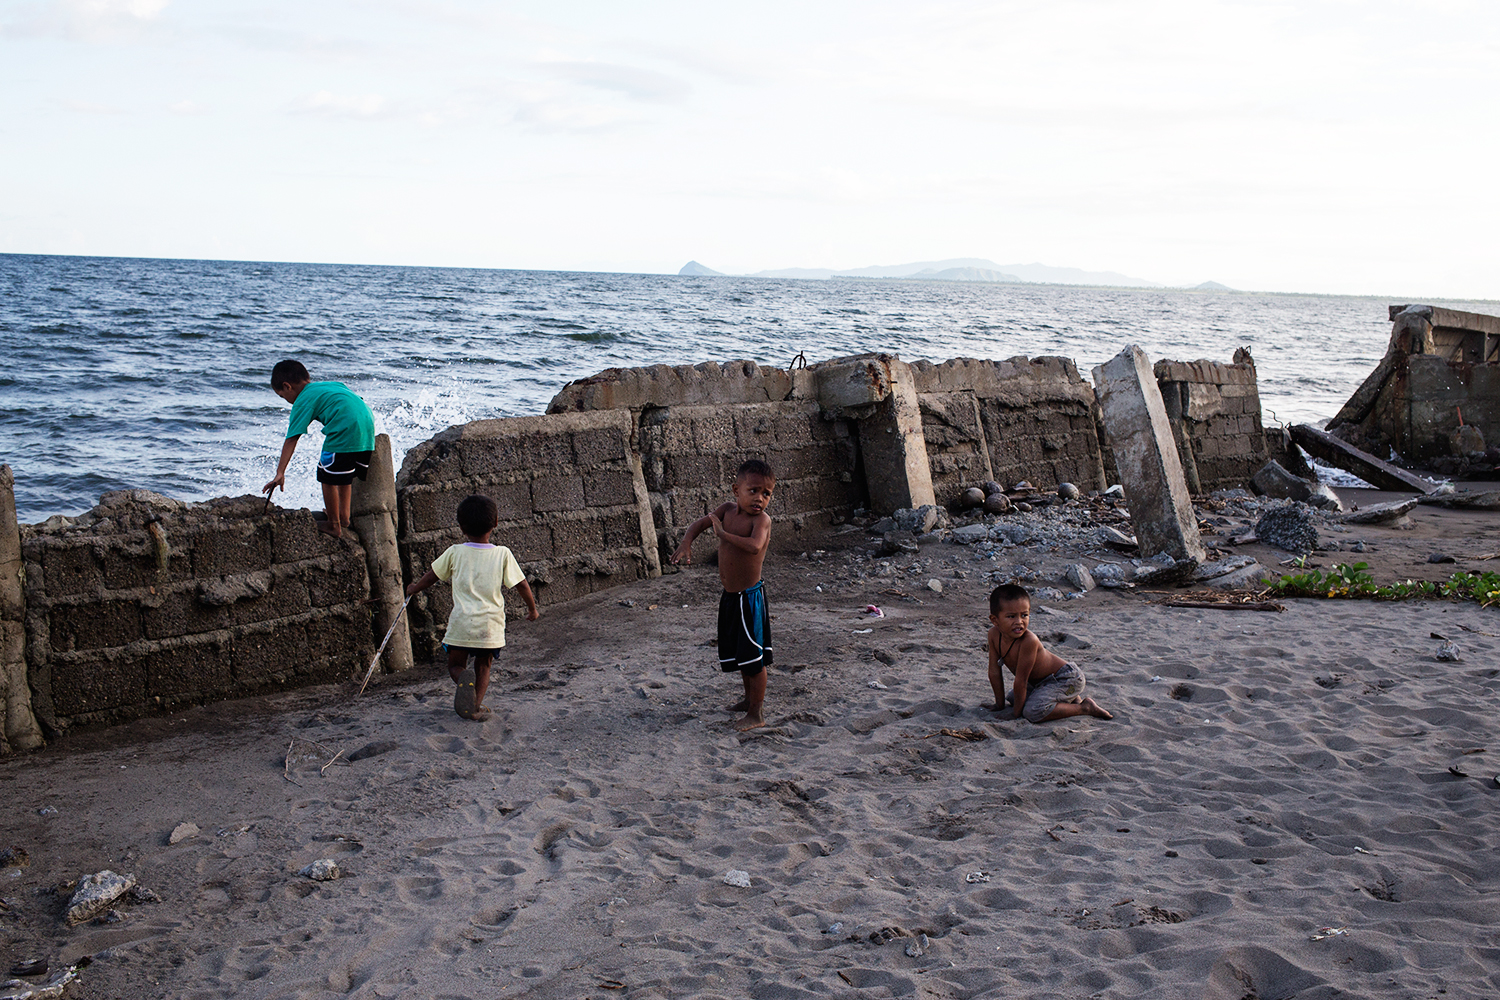  Children play by the water, on a wall torn apart by Typhoon Haiyan in the tent city near San Jose airport, Tacloban Leyte. 